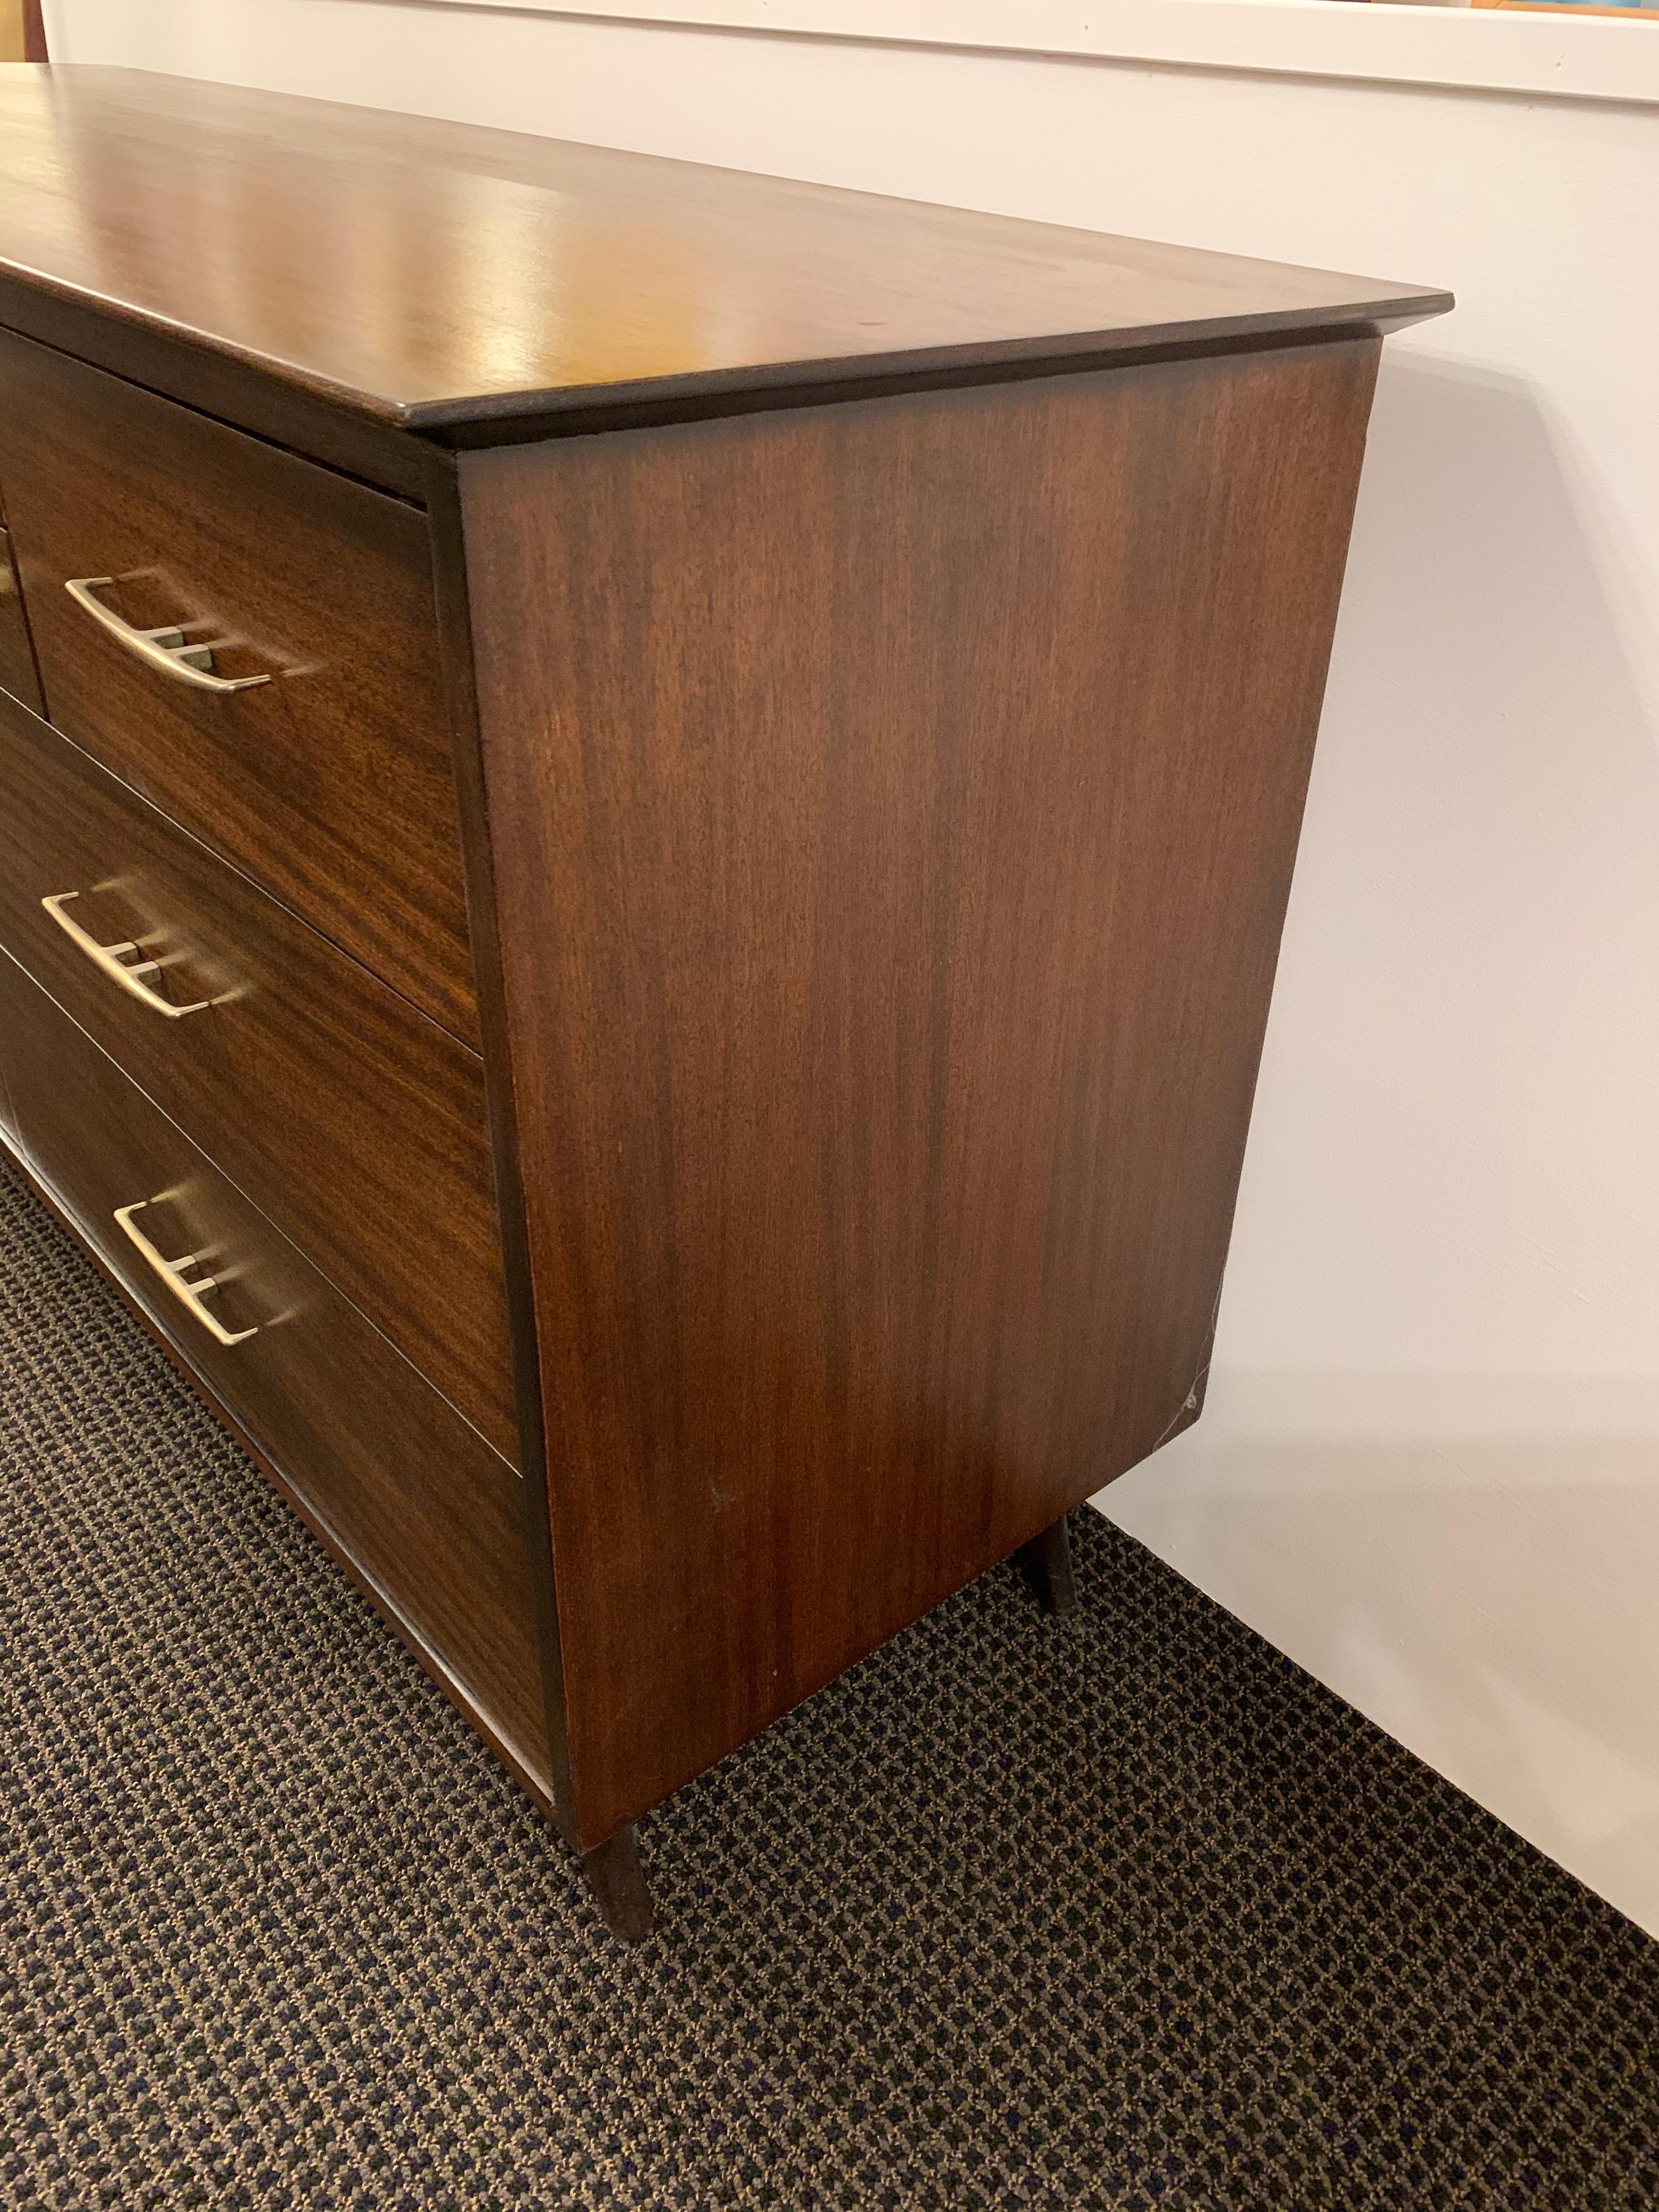 RWAY Furniture Midcentury Dresser In Good Condition For Sale In East Hampton, NY